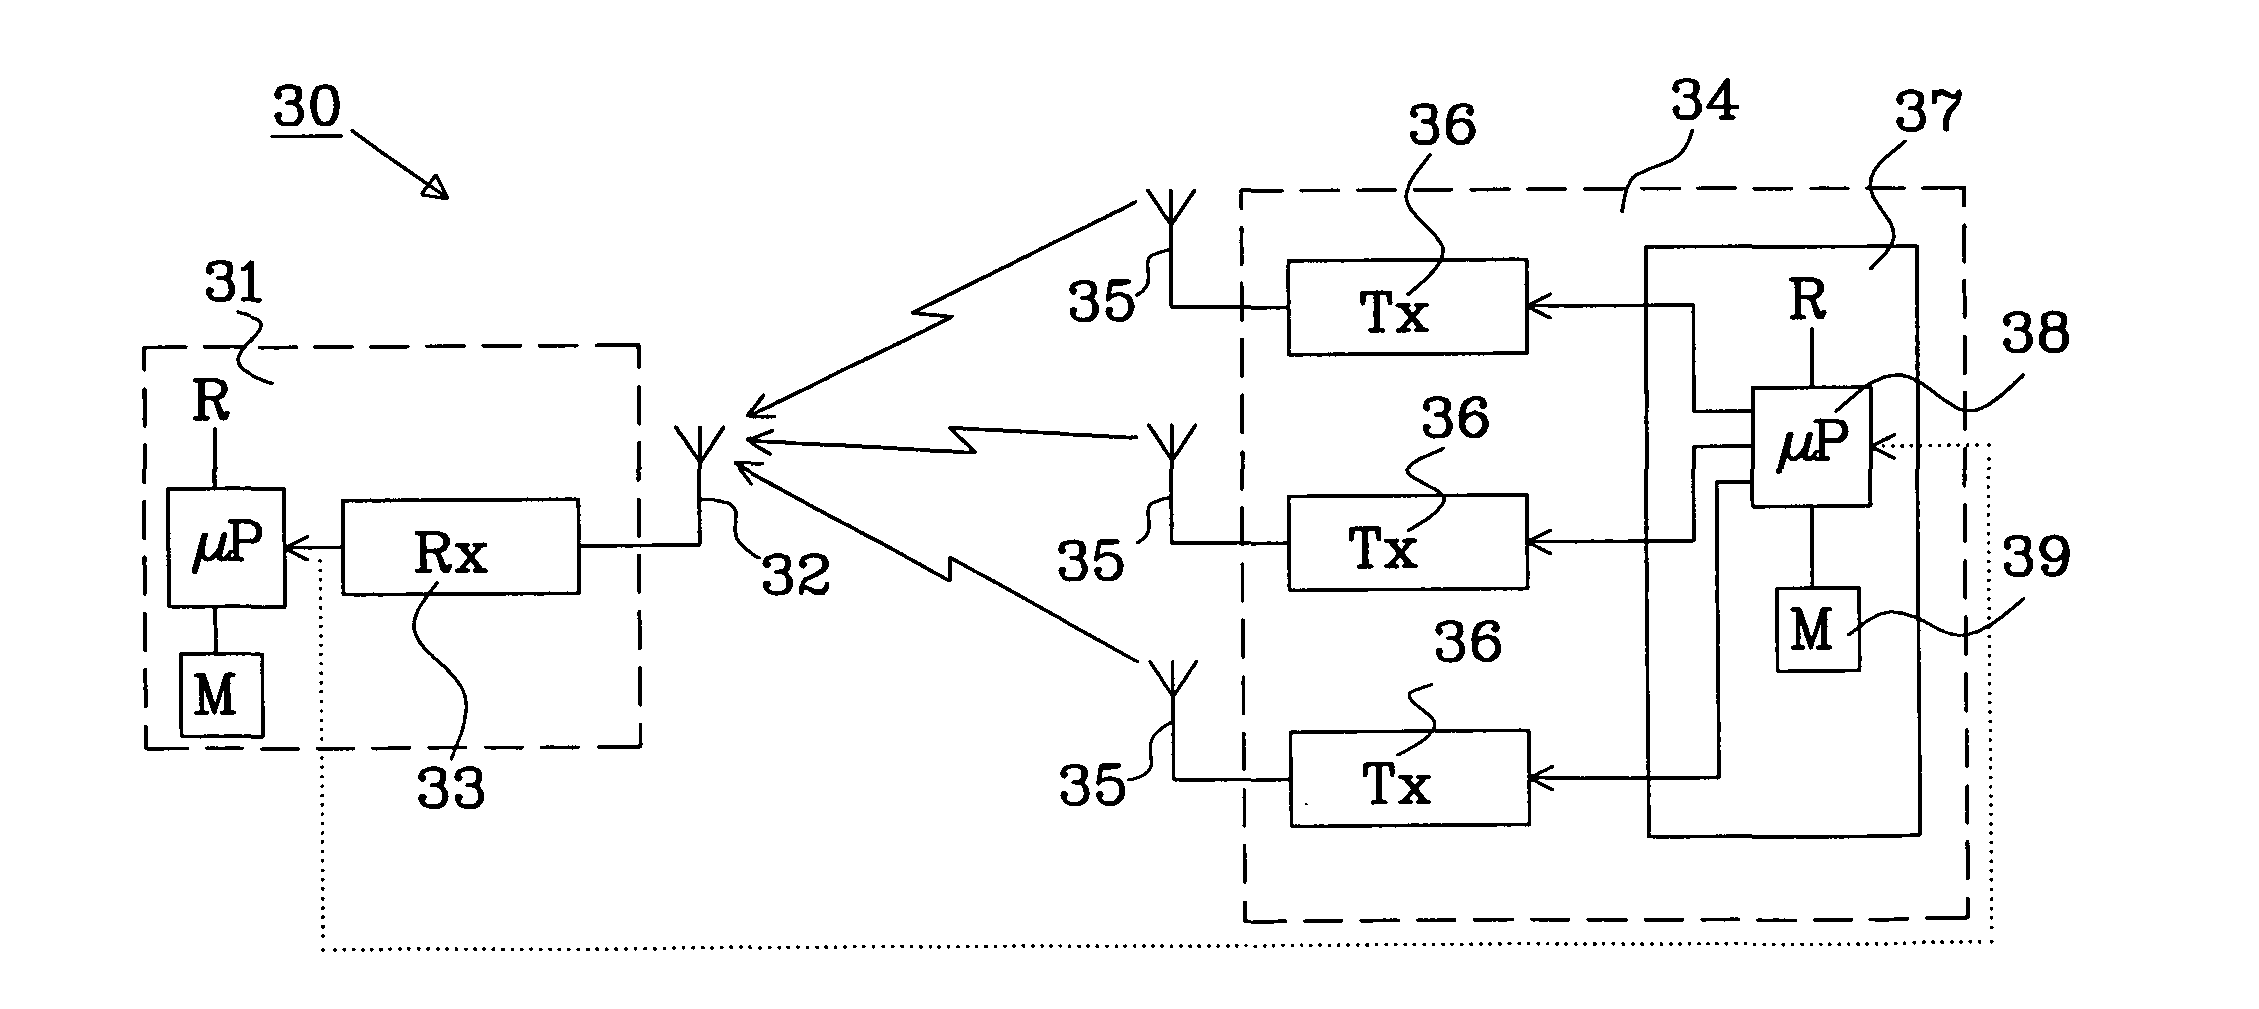 Method For Antenna Calibration In A Wideband Communication System